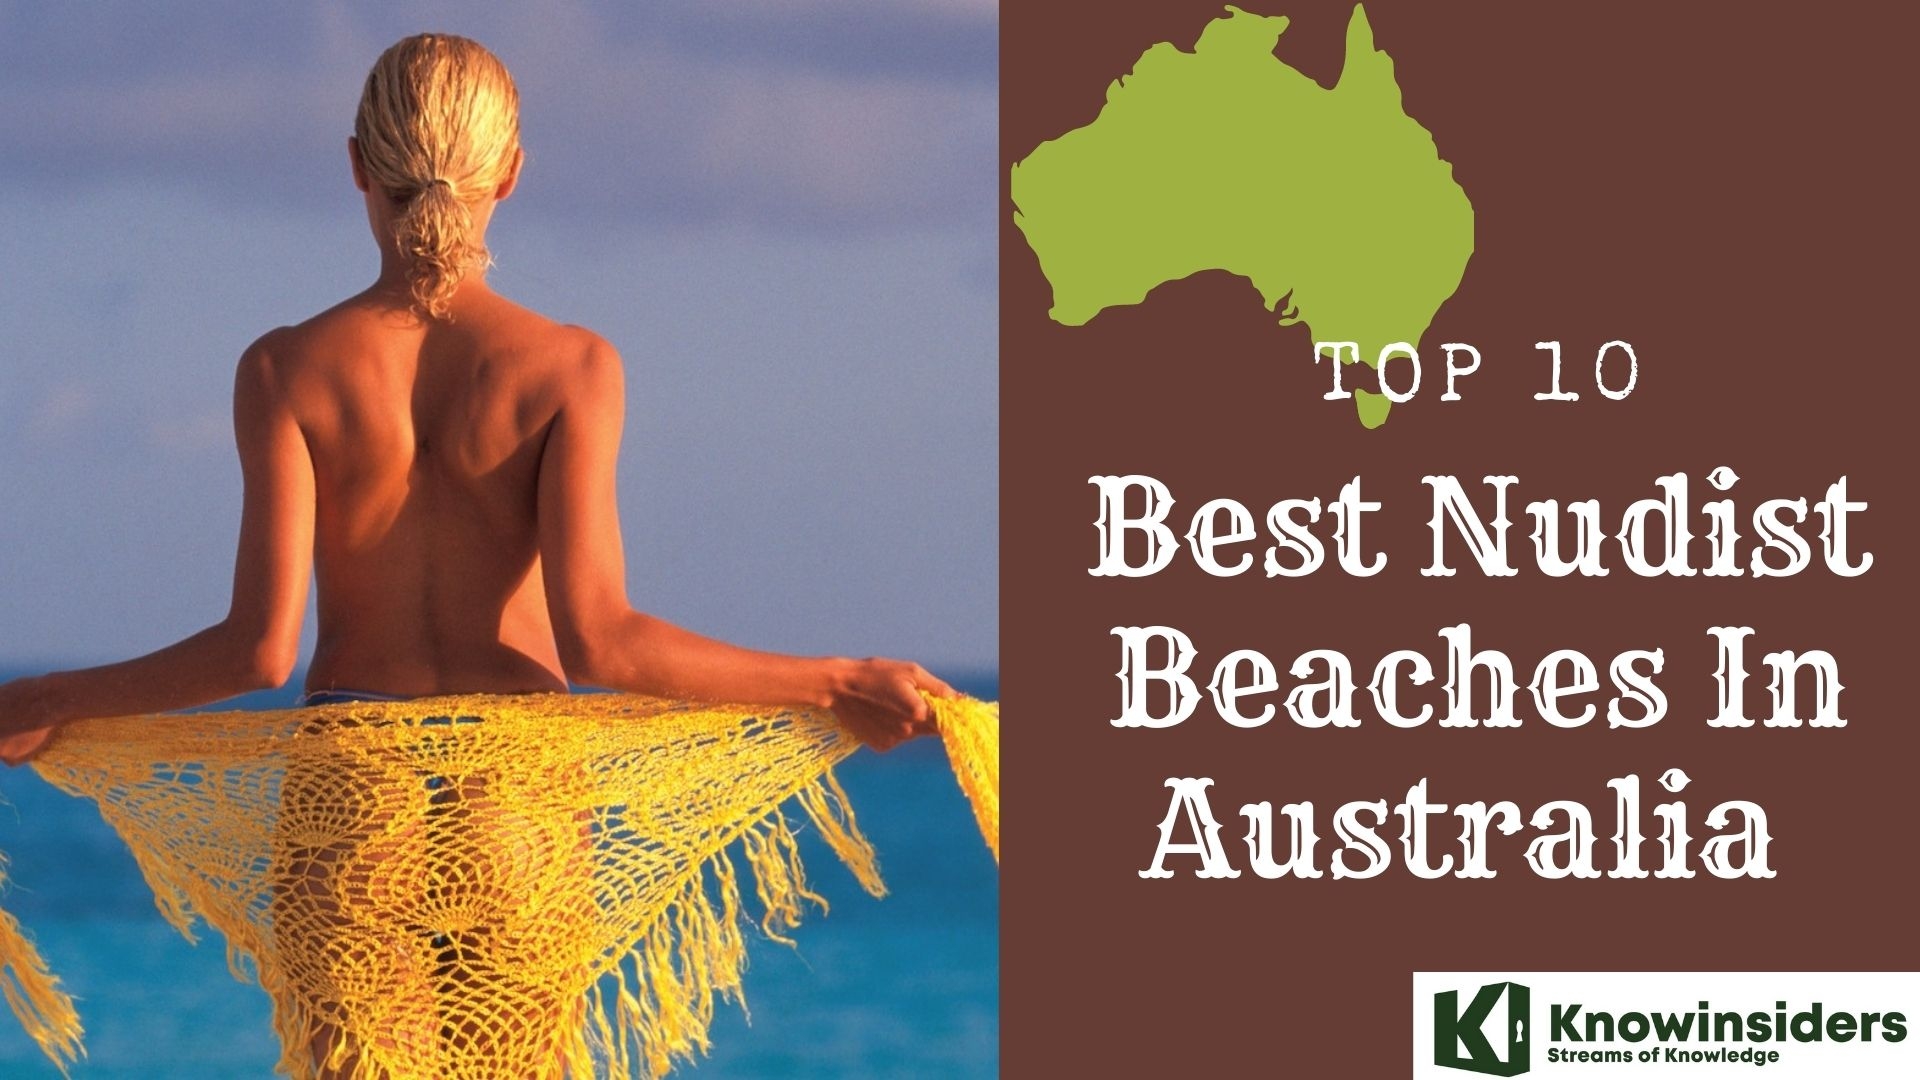 Top 10 Best Beaches in Australia Where Nudism is Legal and Accepted